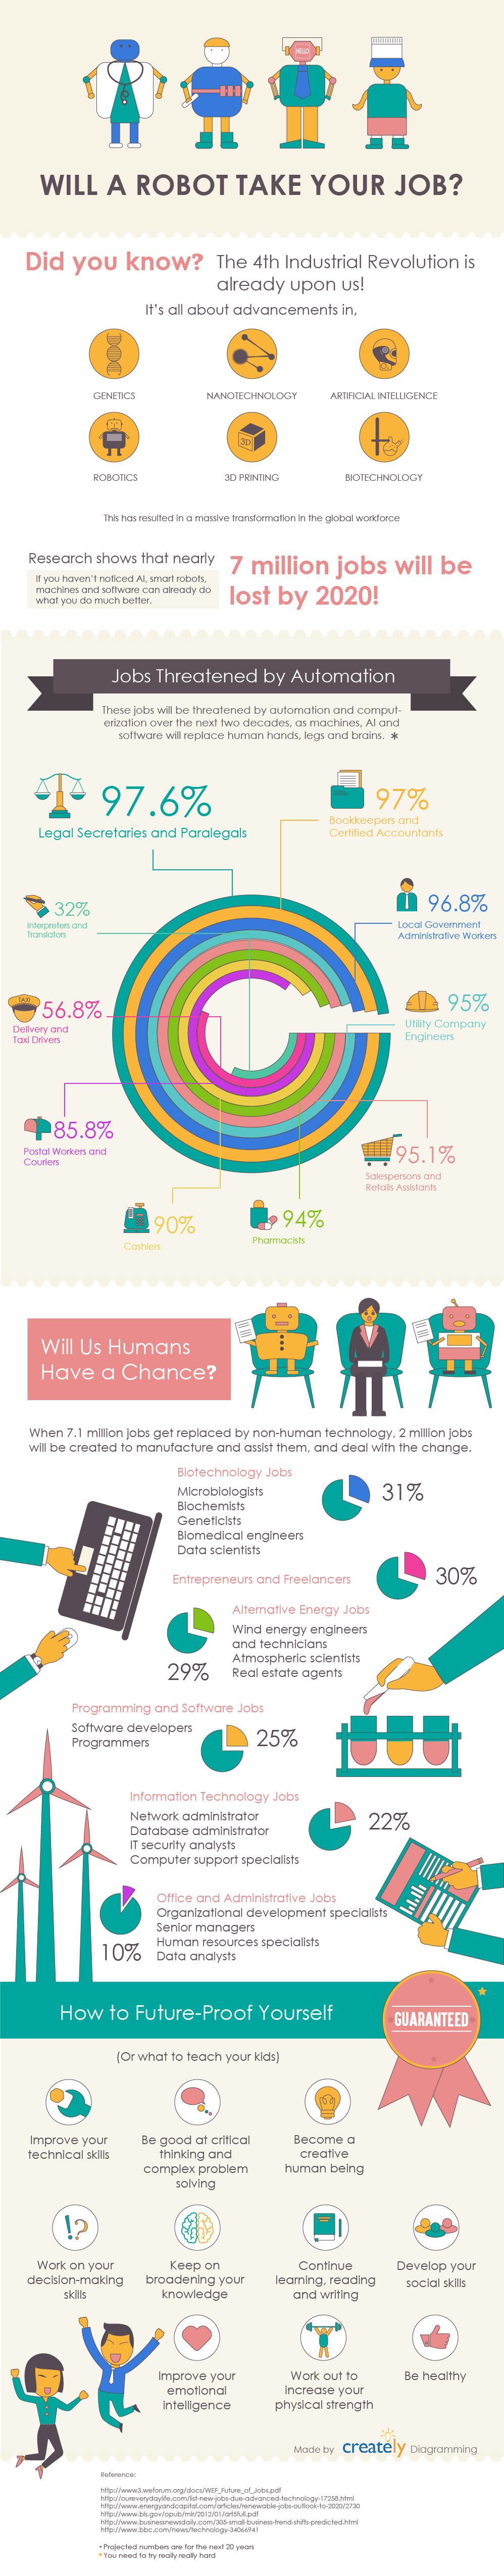 will-a-robot-take-my-job-infographic